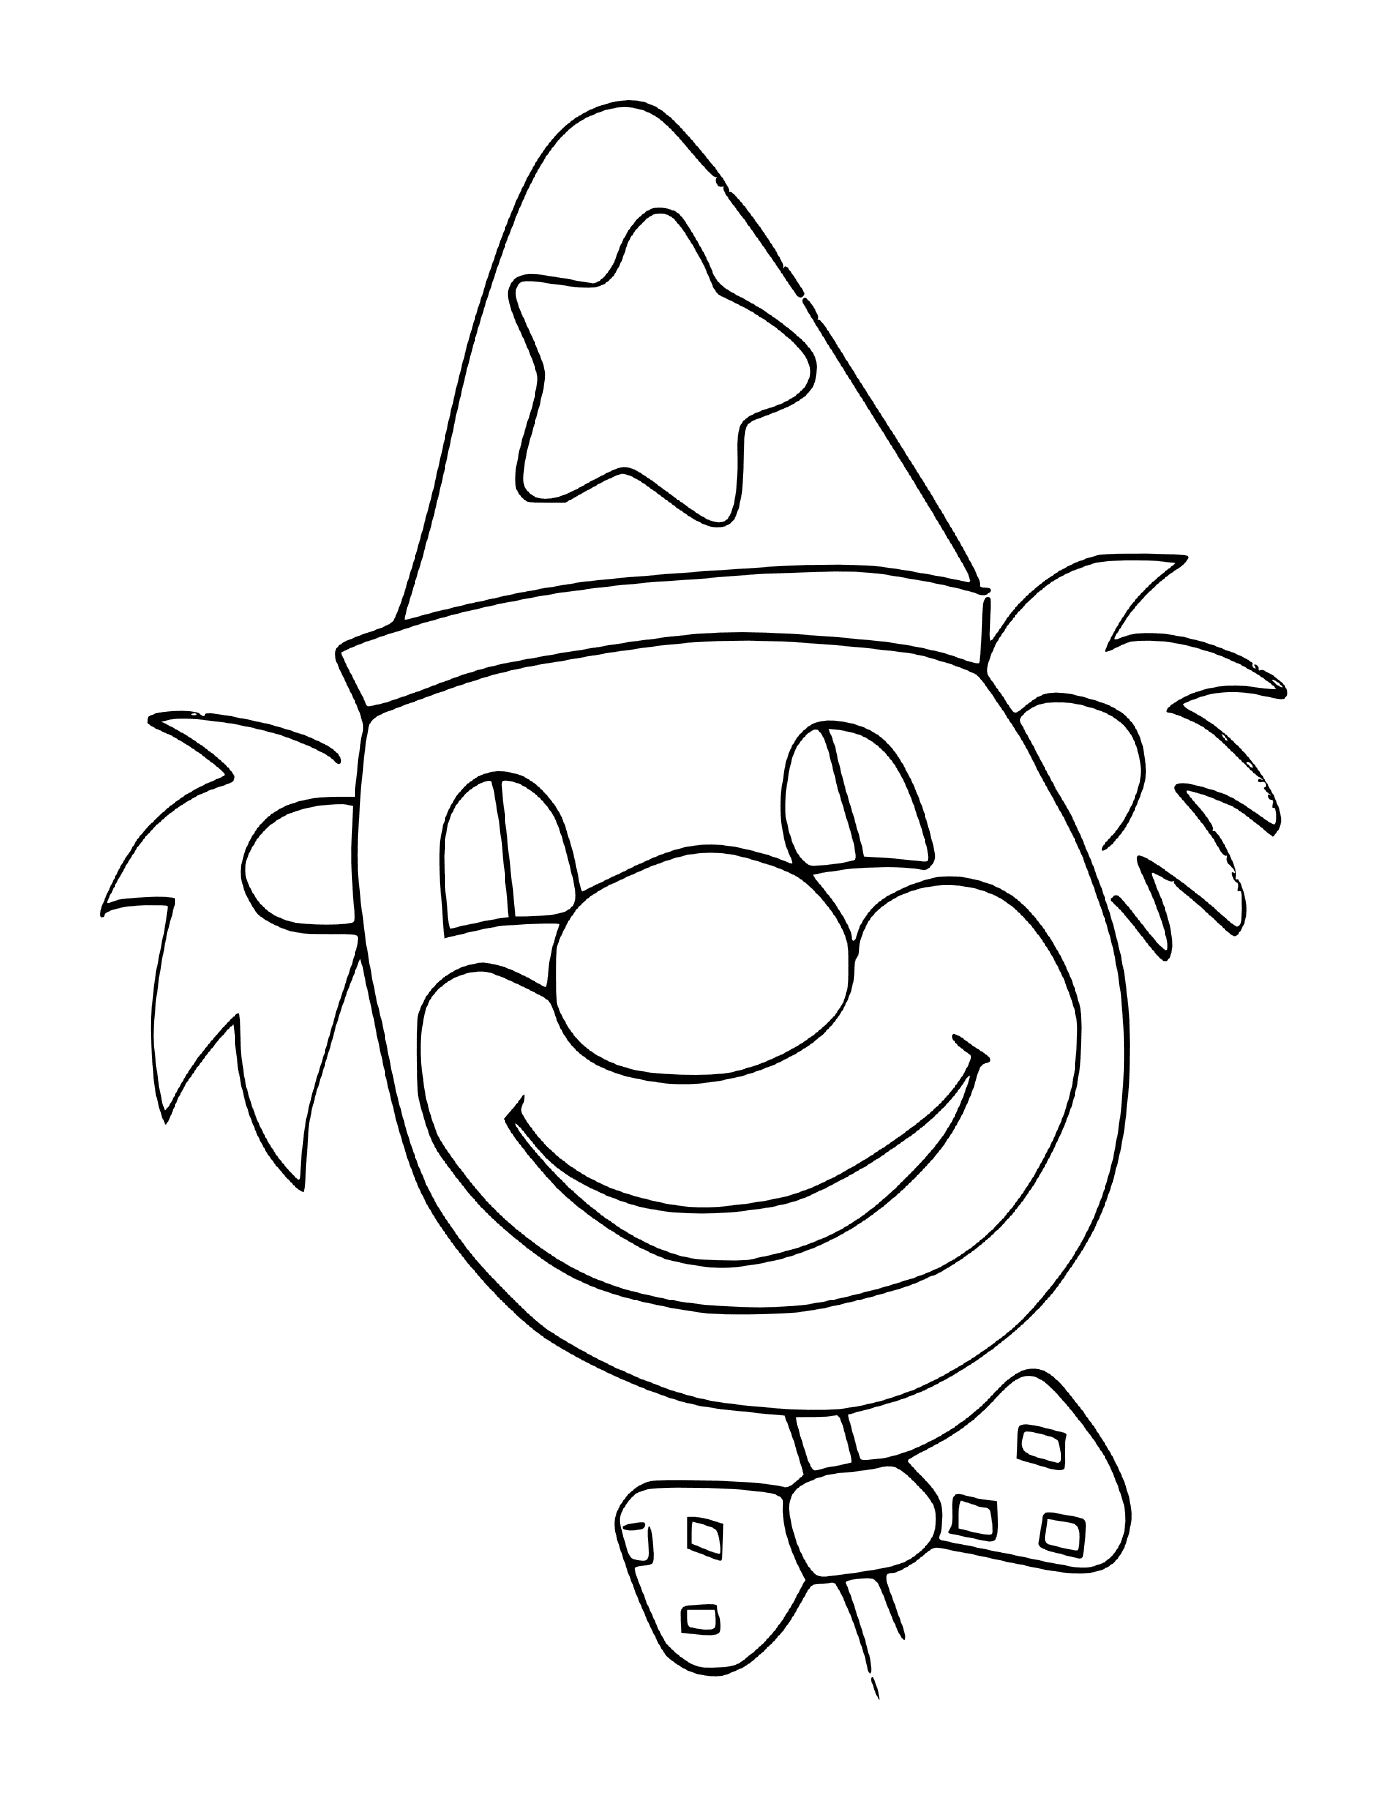  Clown with a cheerful smile to amuse children 